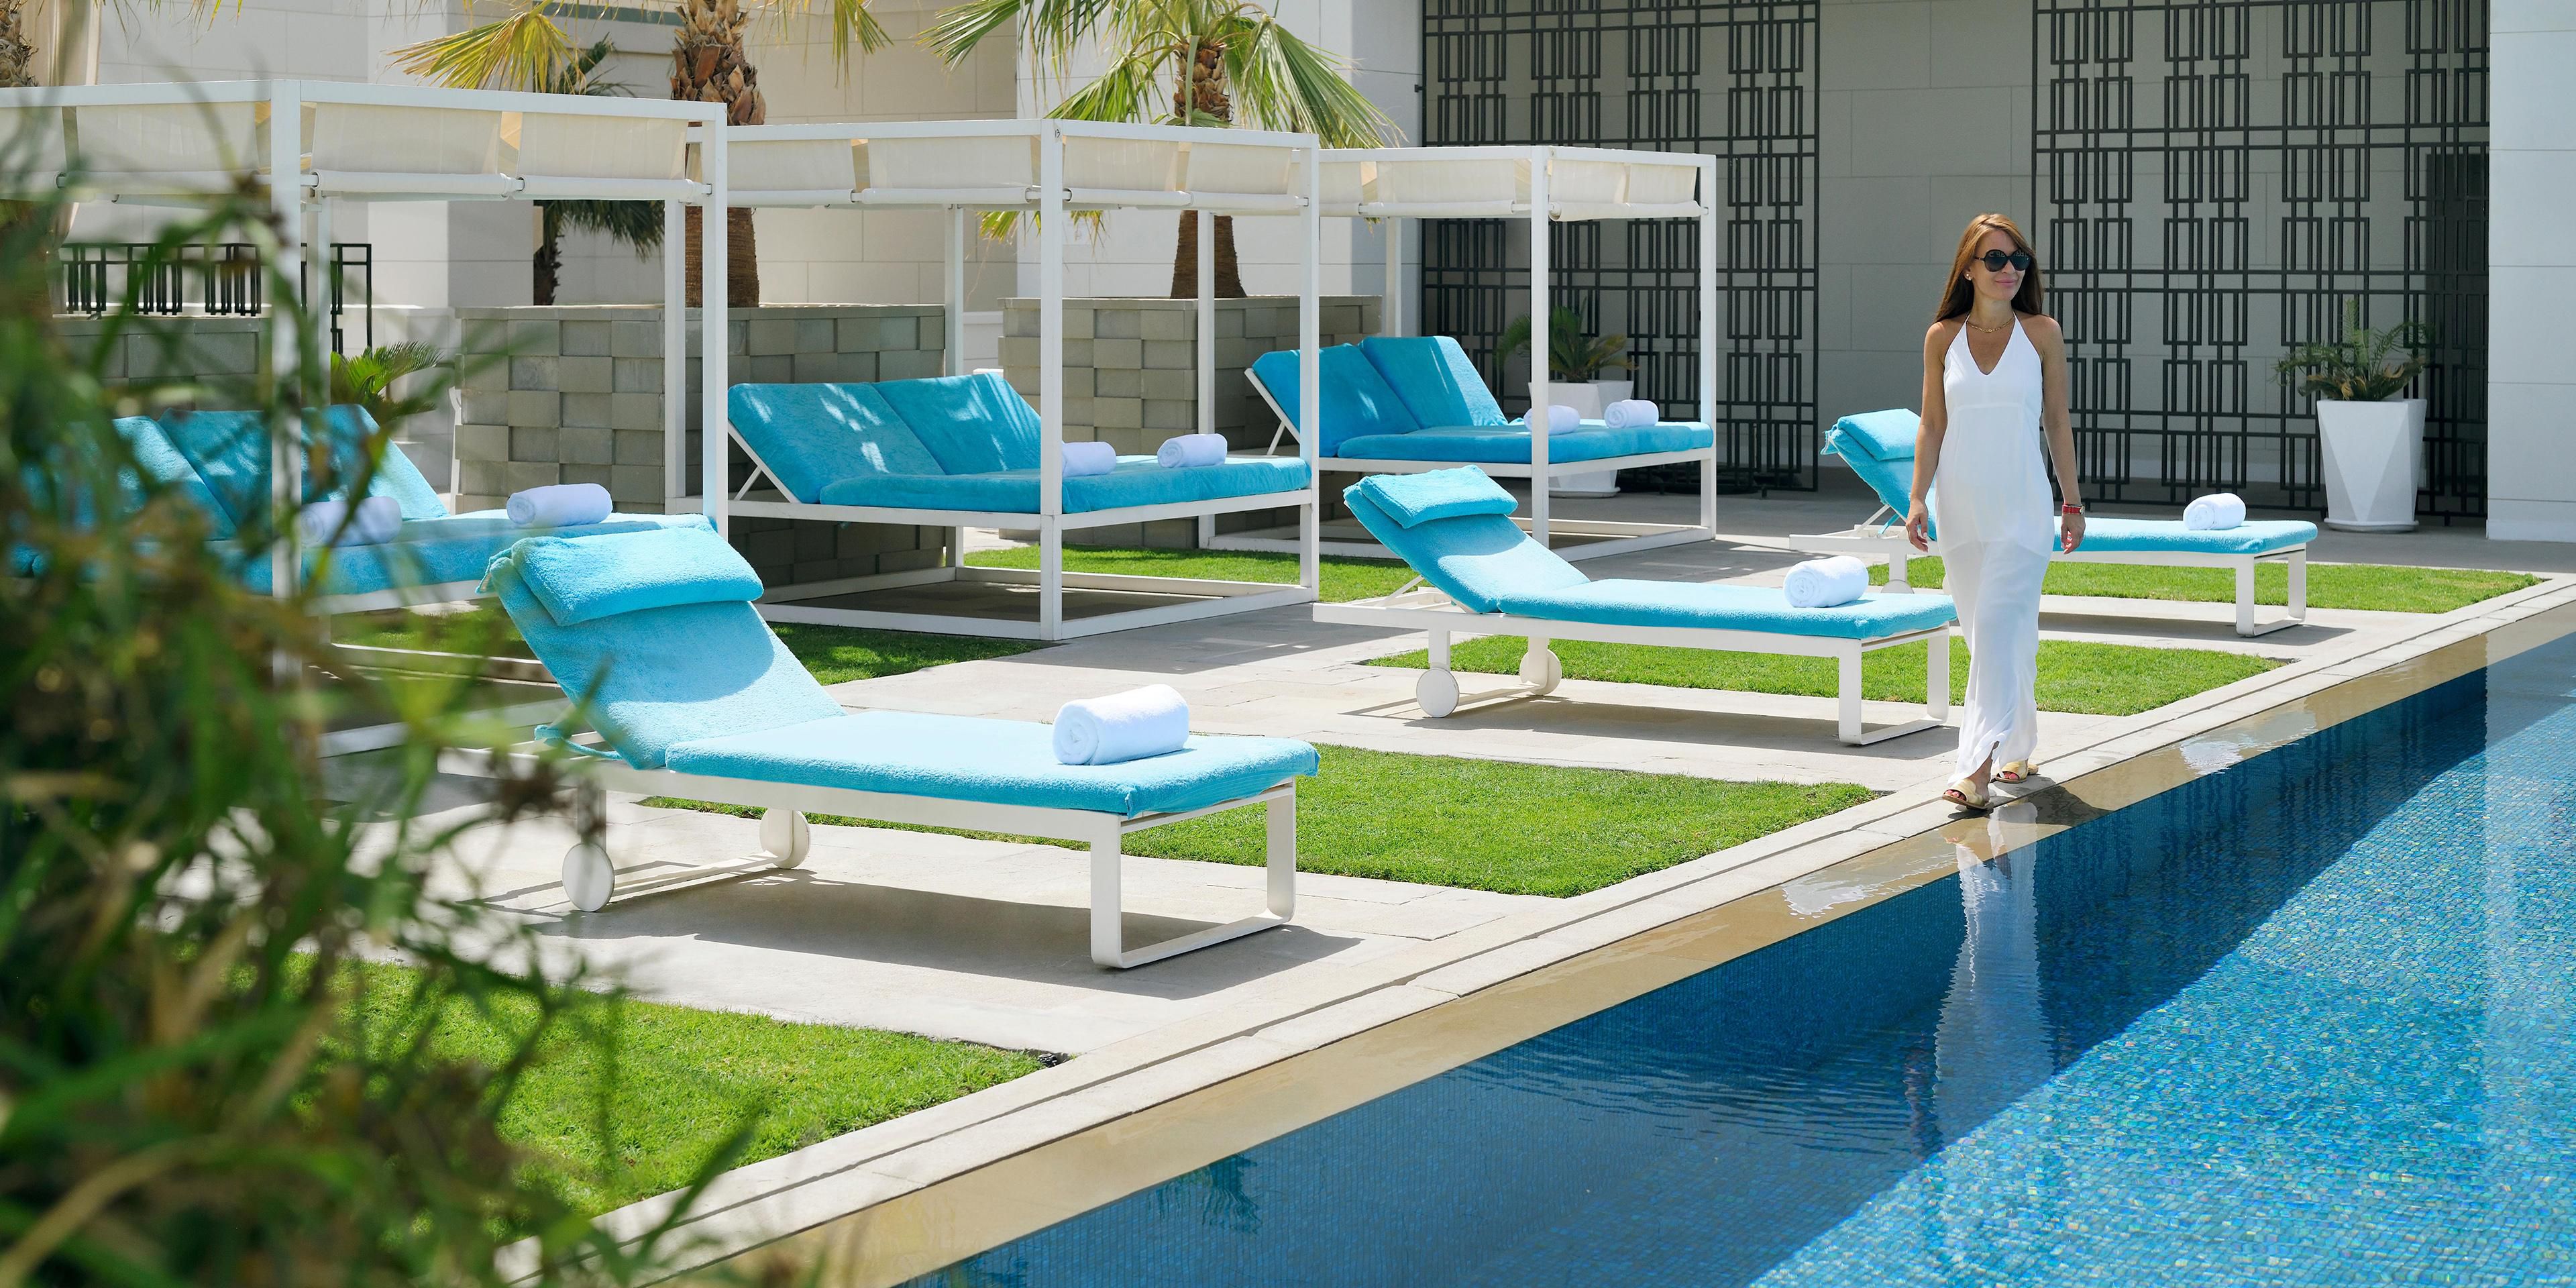 Escape from the stress of the city and enjoy a unique moment in a green oasis in the heart of Manama. At our serene Elements Pool & Lounge, you can relax on a daybed with a refreshing mocktail, or enjoy the evening breeze from our poolside tables while enjoying our signature dishes or cocktail drinks as you relax to a silky soundtrack.